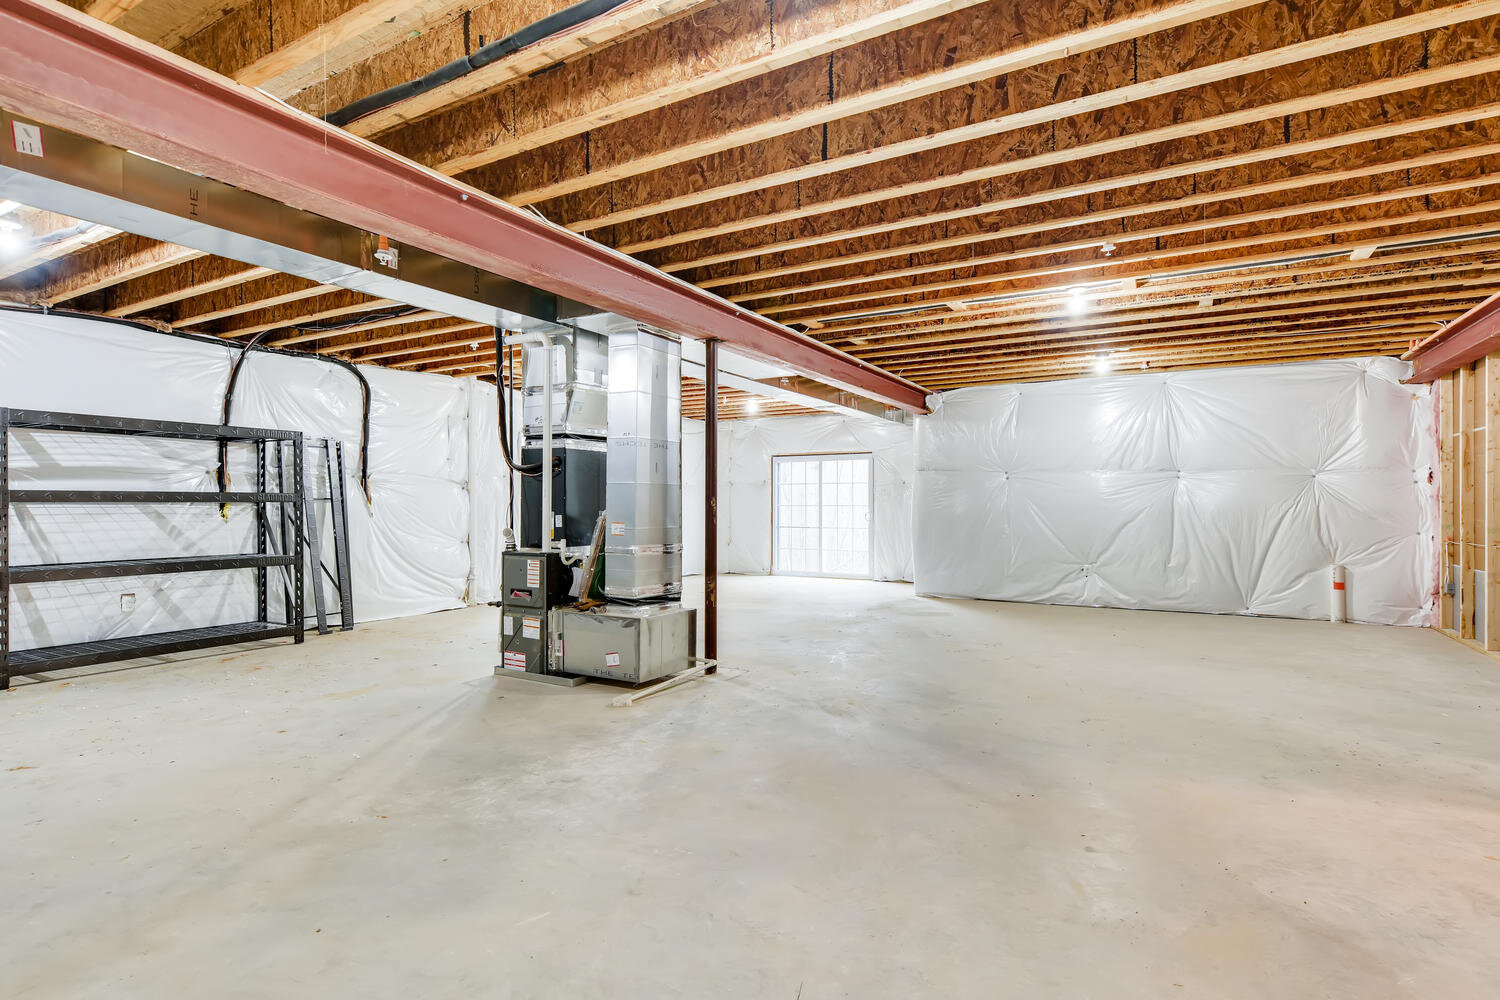 Rancher unfinished basement in Harford county Maryalnd